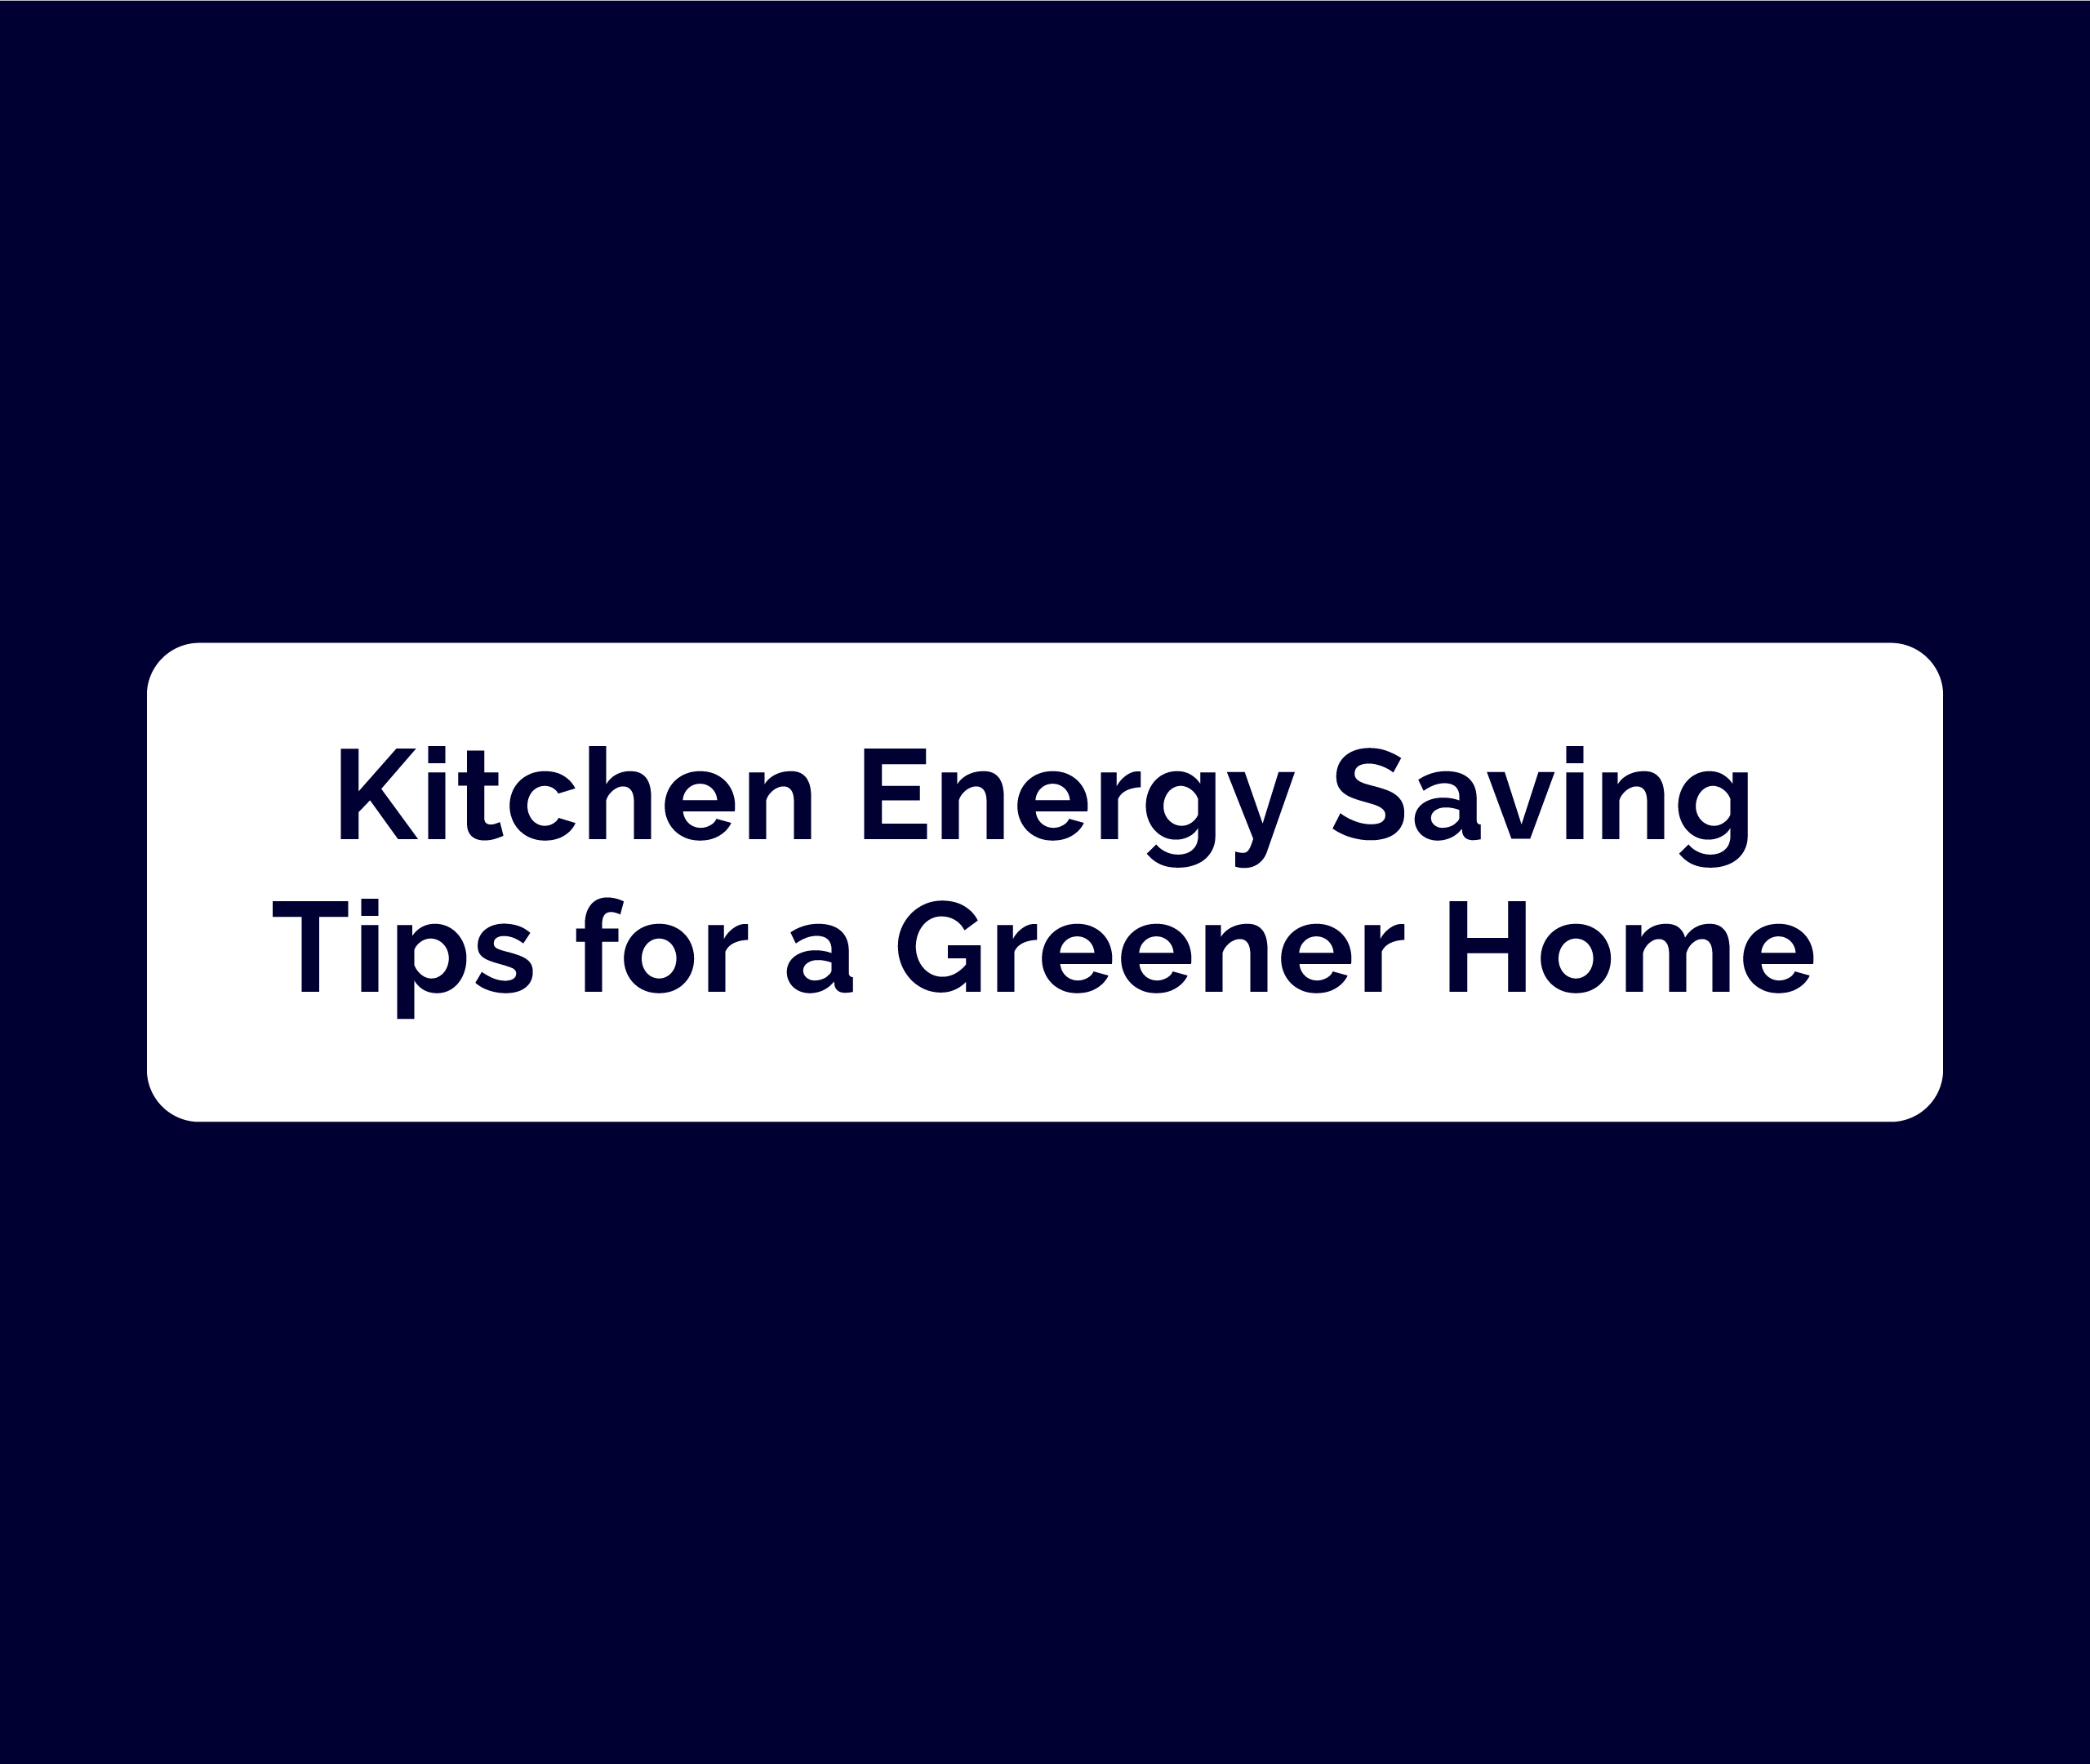 Kitchen Energy Saving Tips for a Greener Home